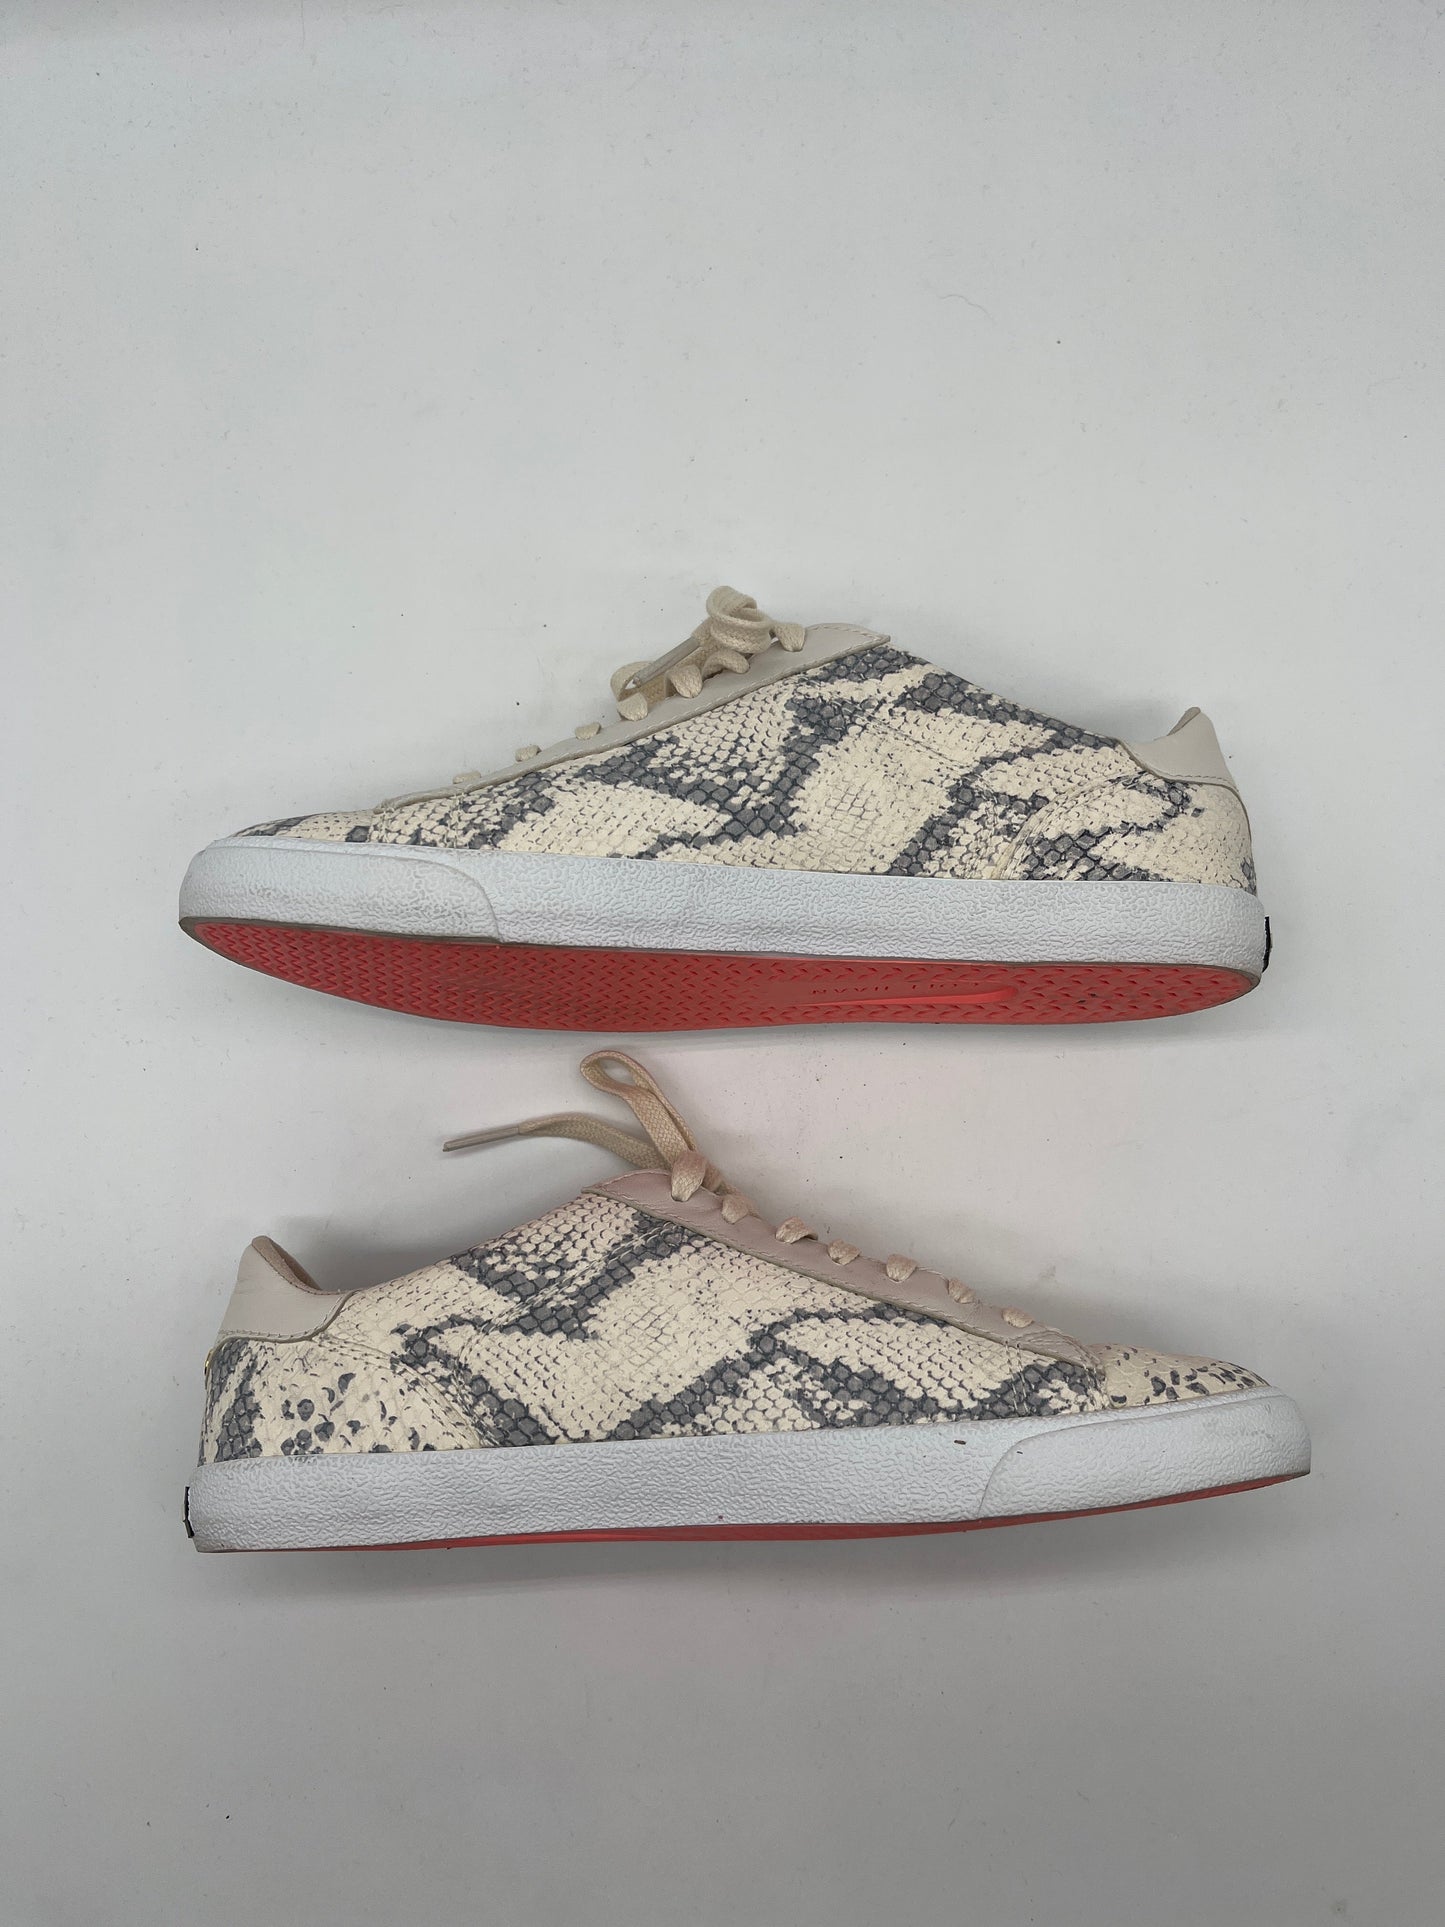 Snakeskin Print Shoes Sneakers Cole-haan, Size 8.5